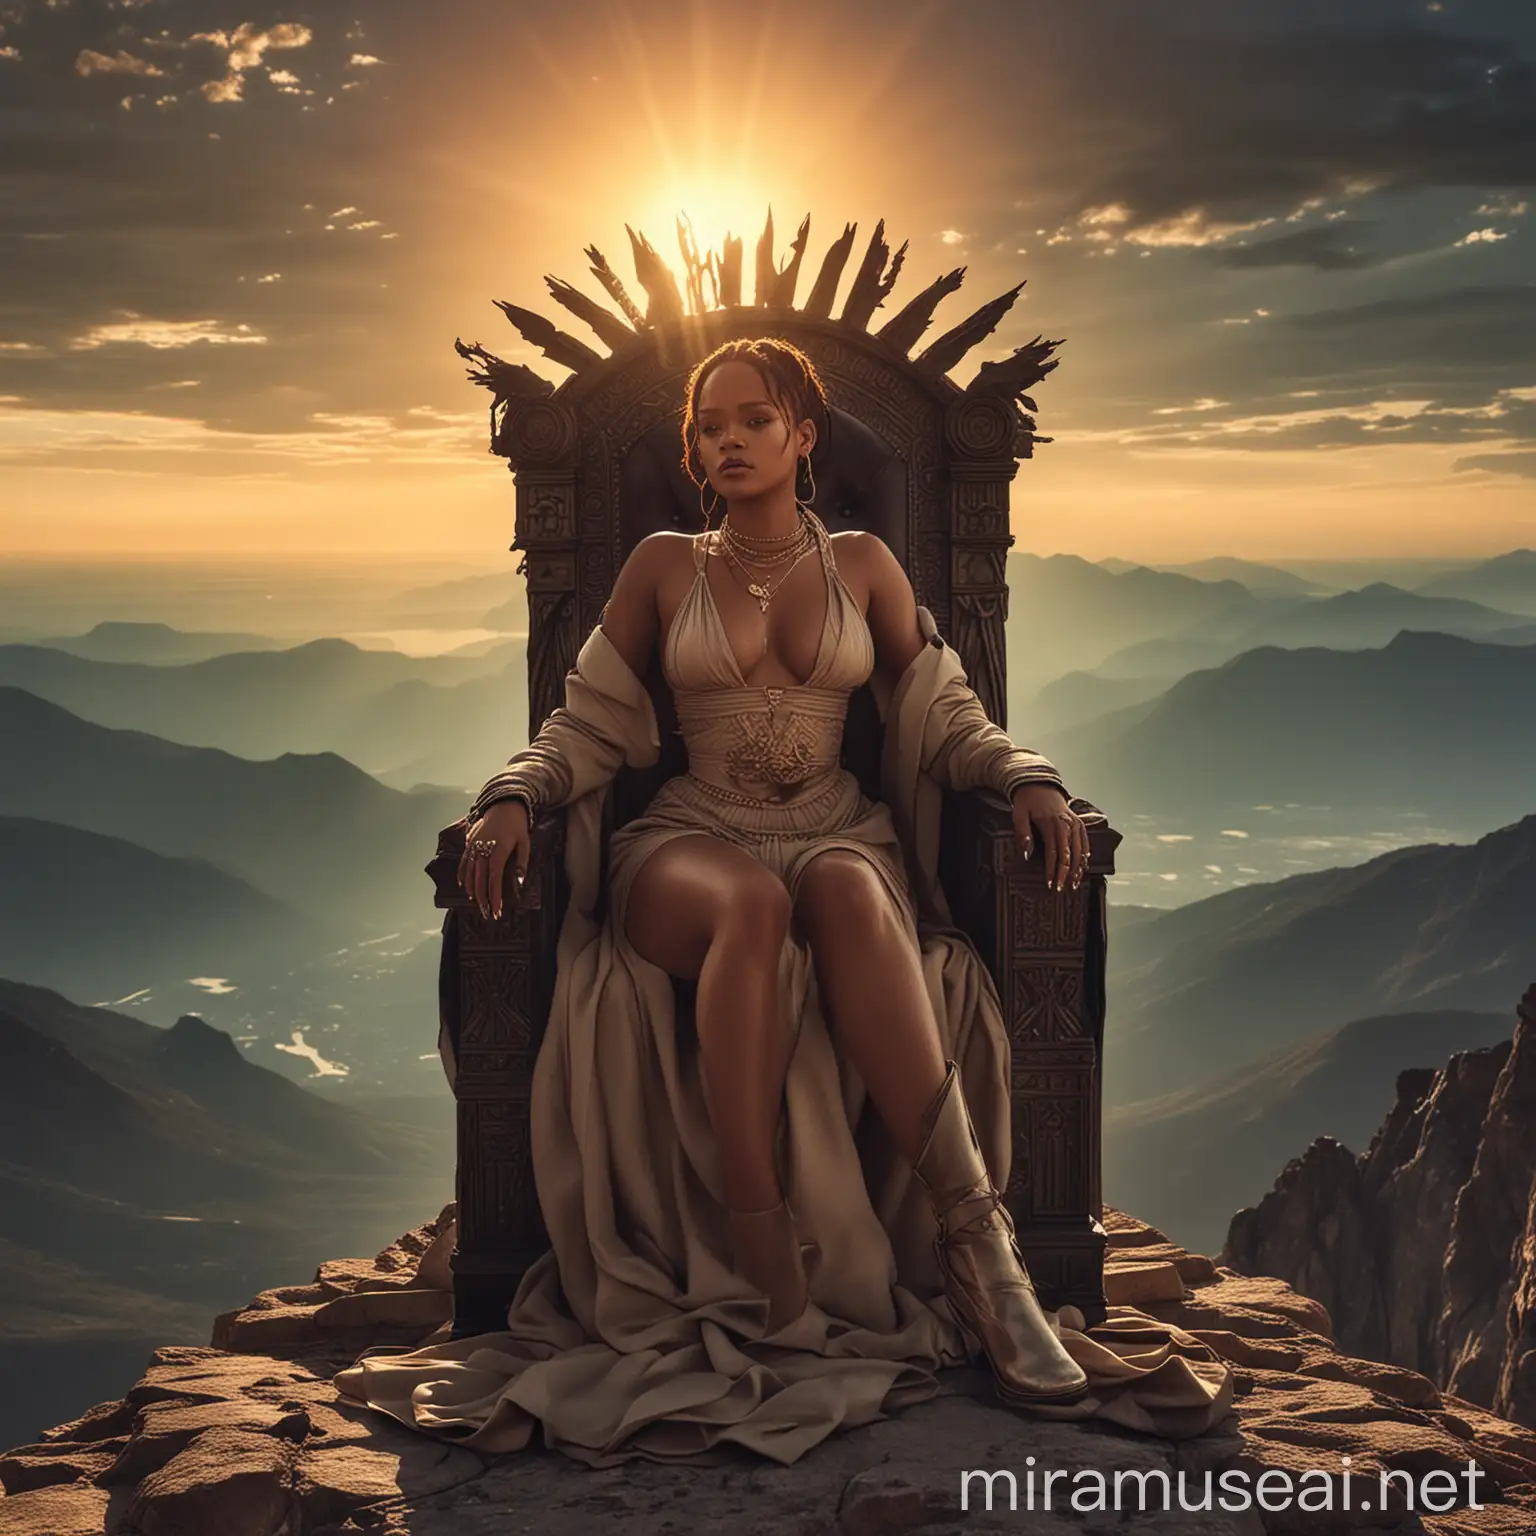 Rihanna on top of a mountain on a throne with the sun behind her
